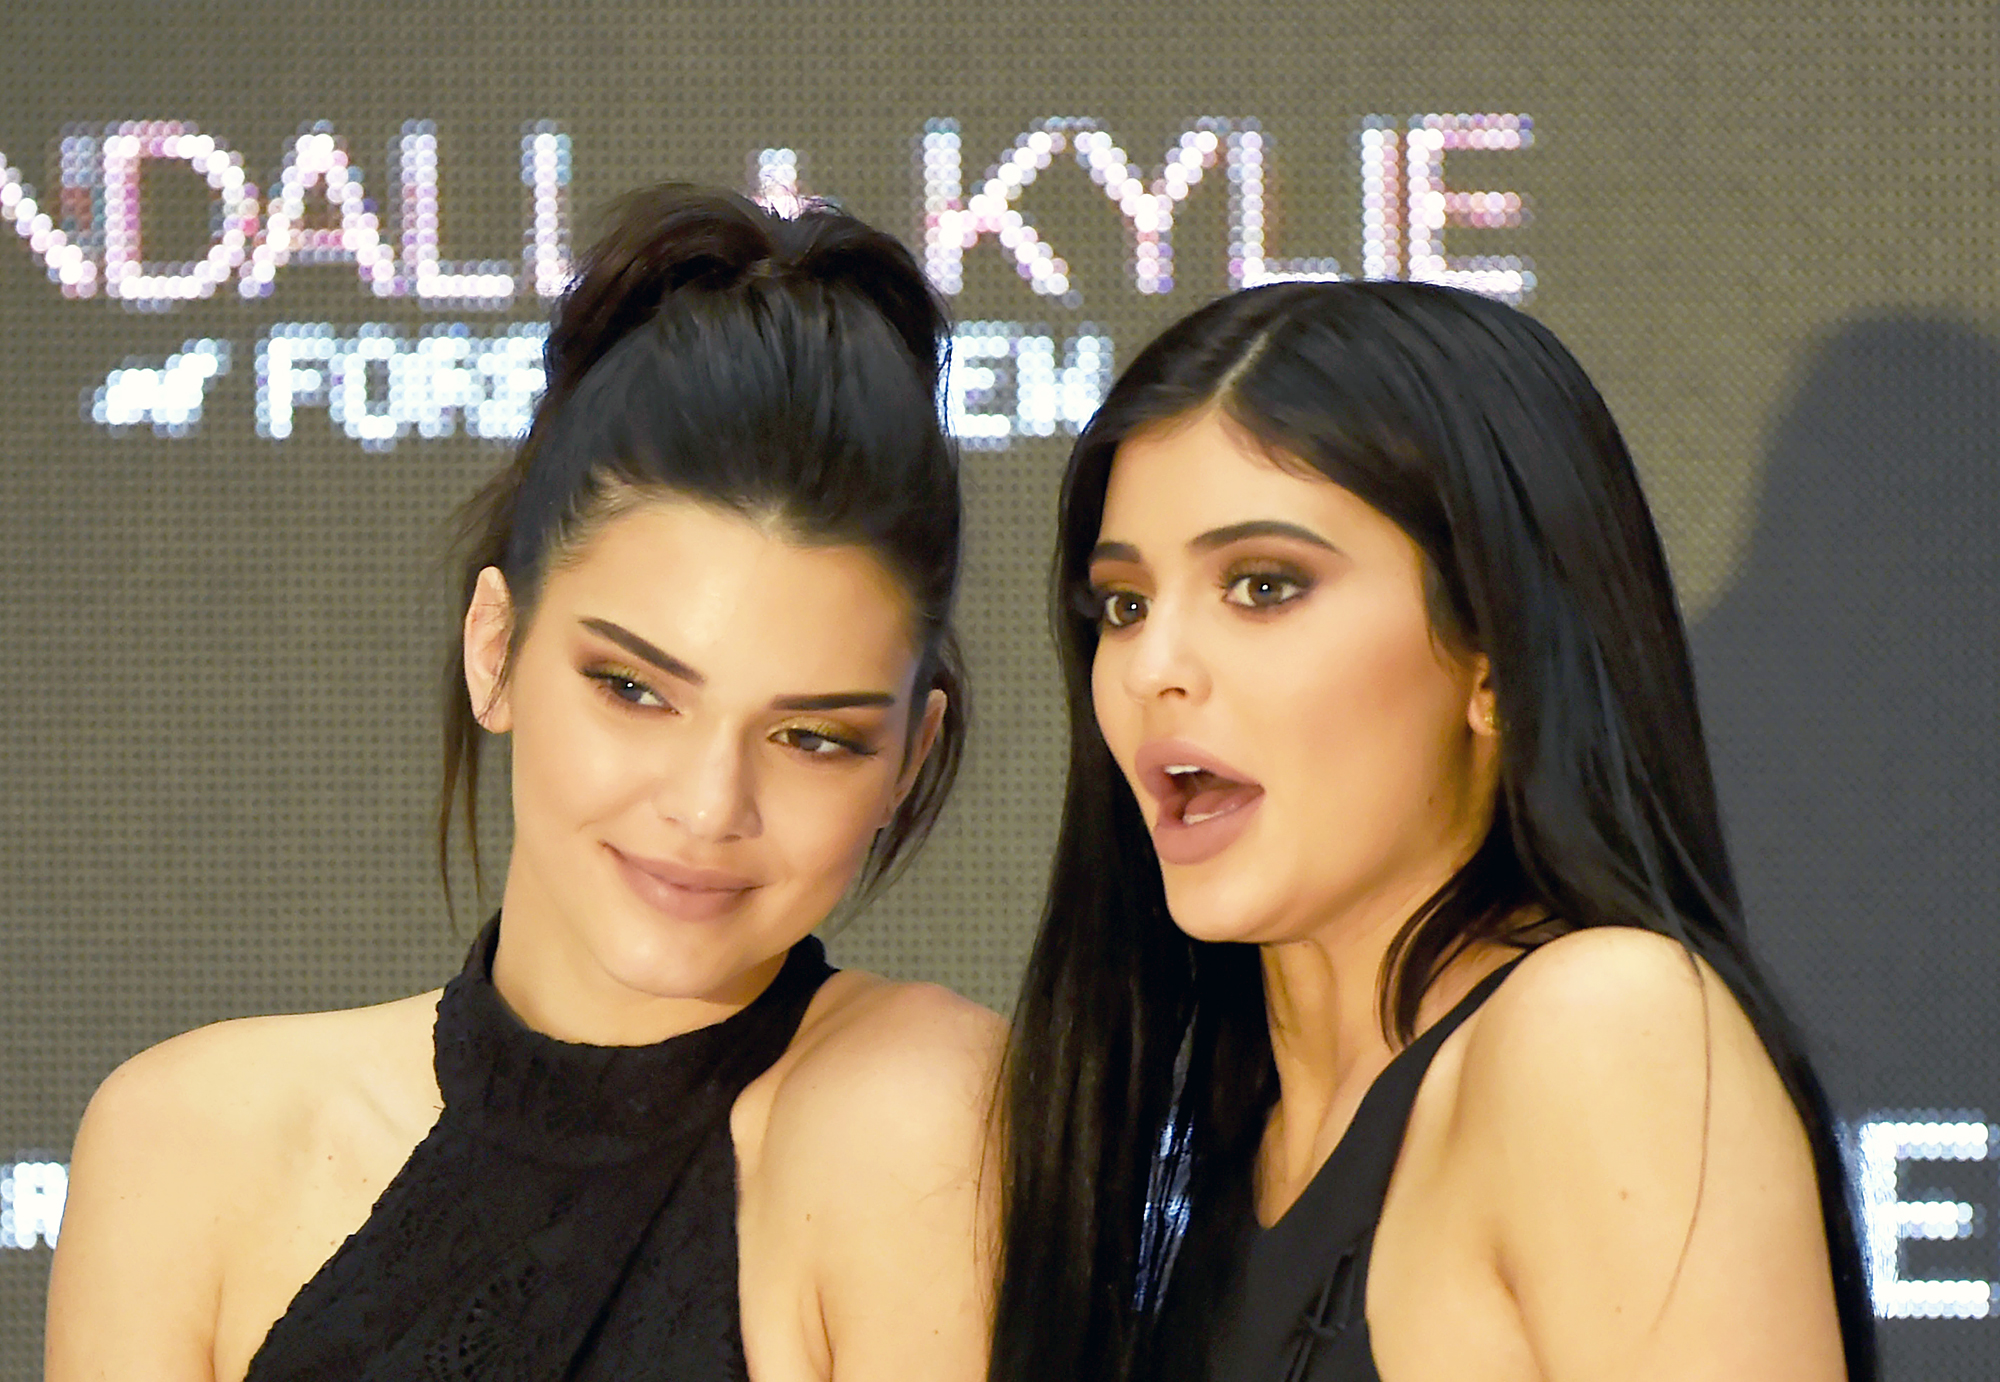 Kendall and Kylie Jenner Receive Backlash After Vintage T-Shirt Launch